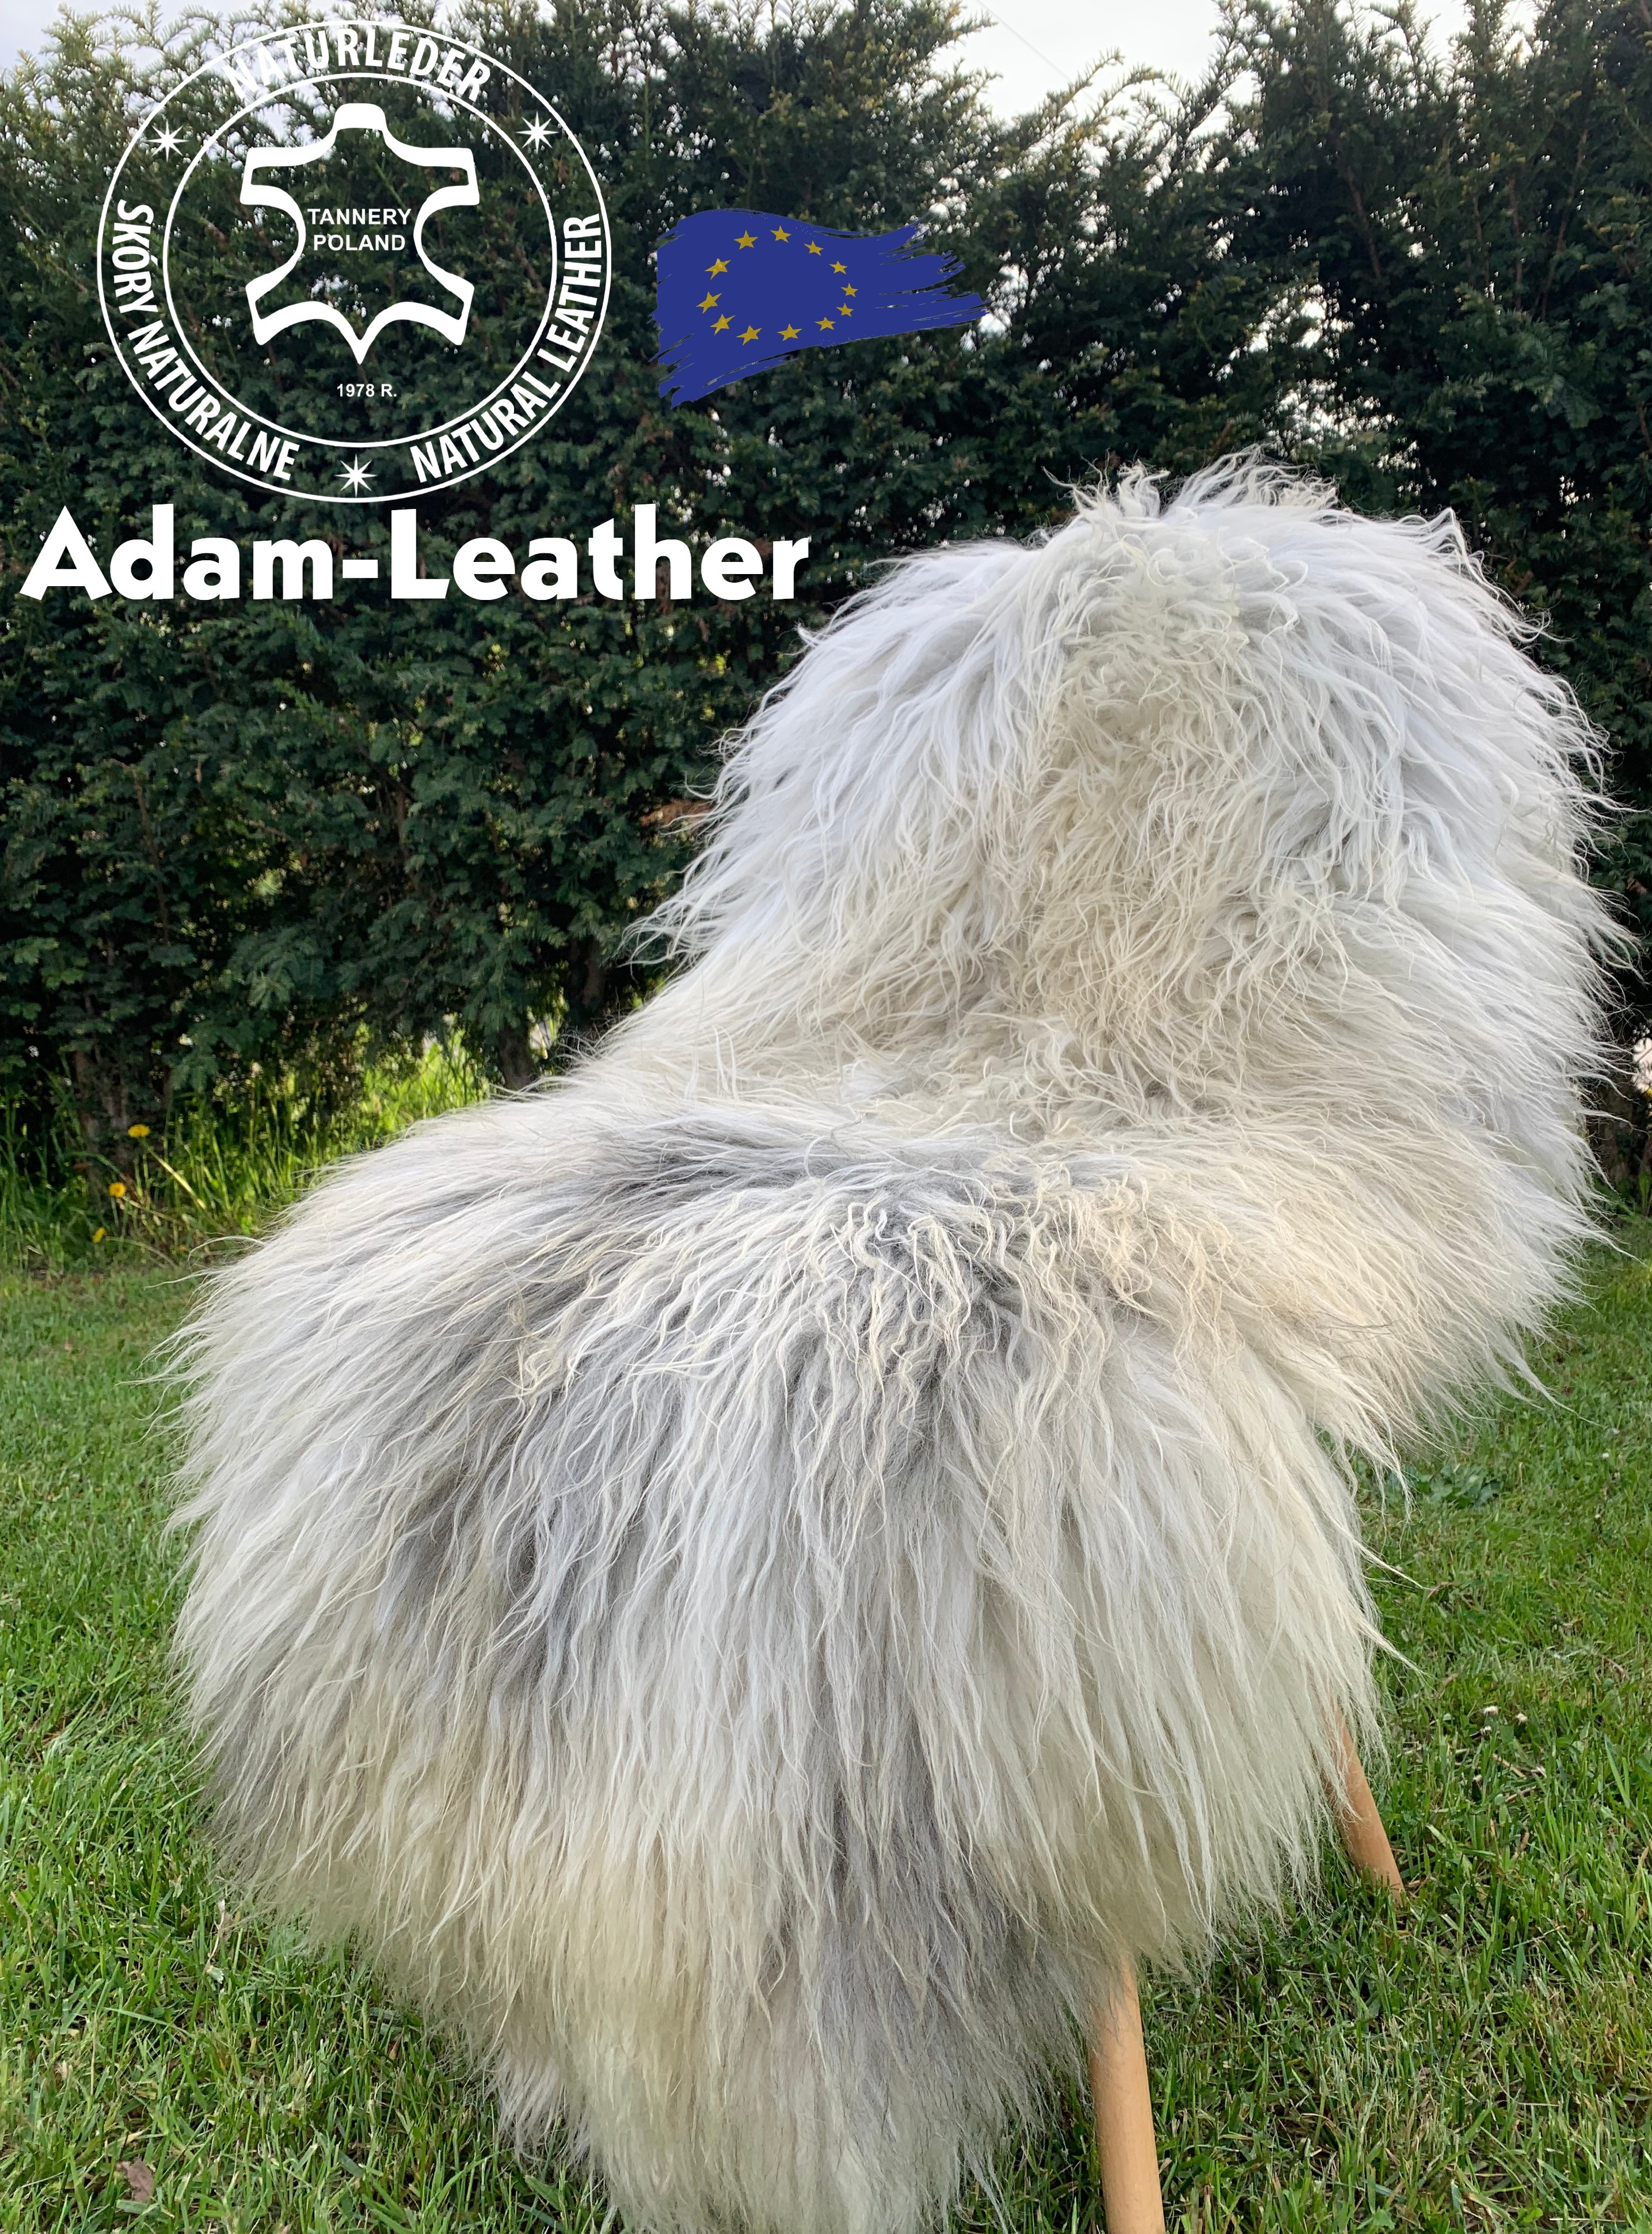 Sheepskins - Naturally from Adam Leather!